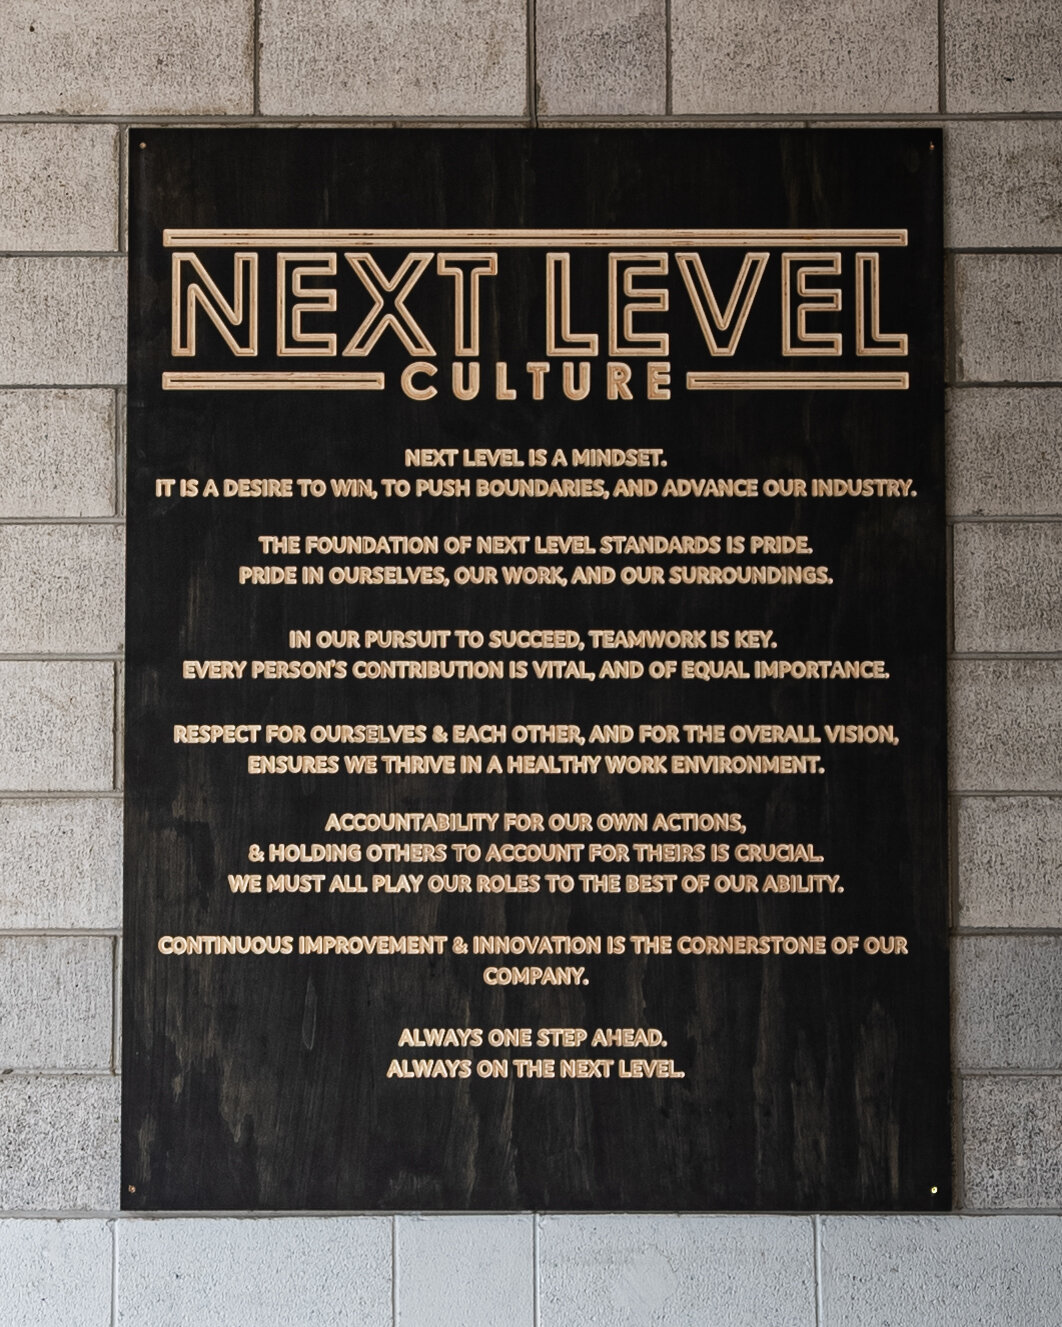 Our Company Values: 

Next Level is a mindset.

It is a desire to win, to push boundaries, and advance our industry.

The foundation of next level standards is pride. Pride in ourselves, our work, and our surroundings,

In our pursuit to succeed, tea